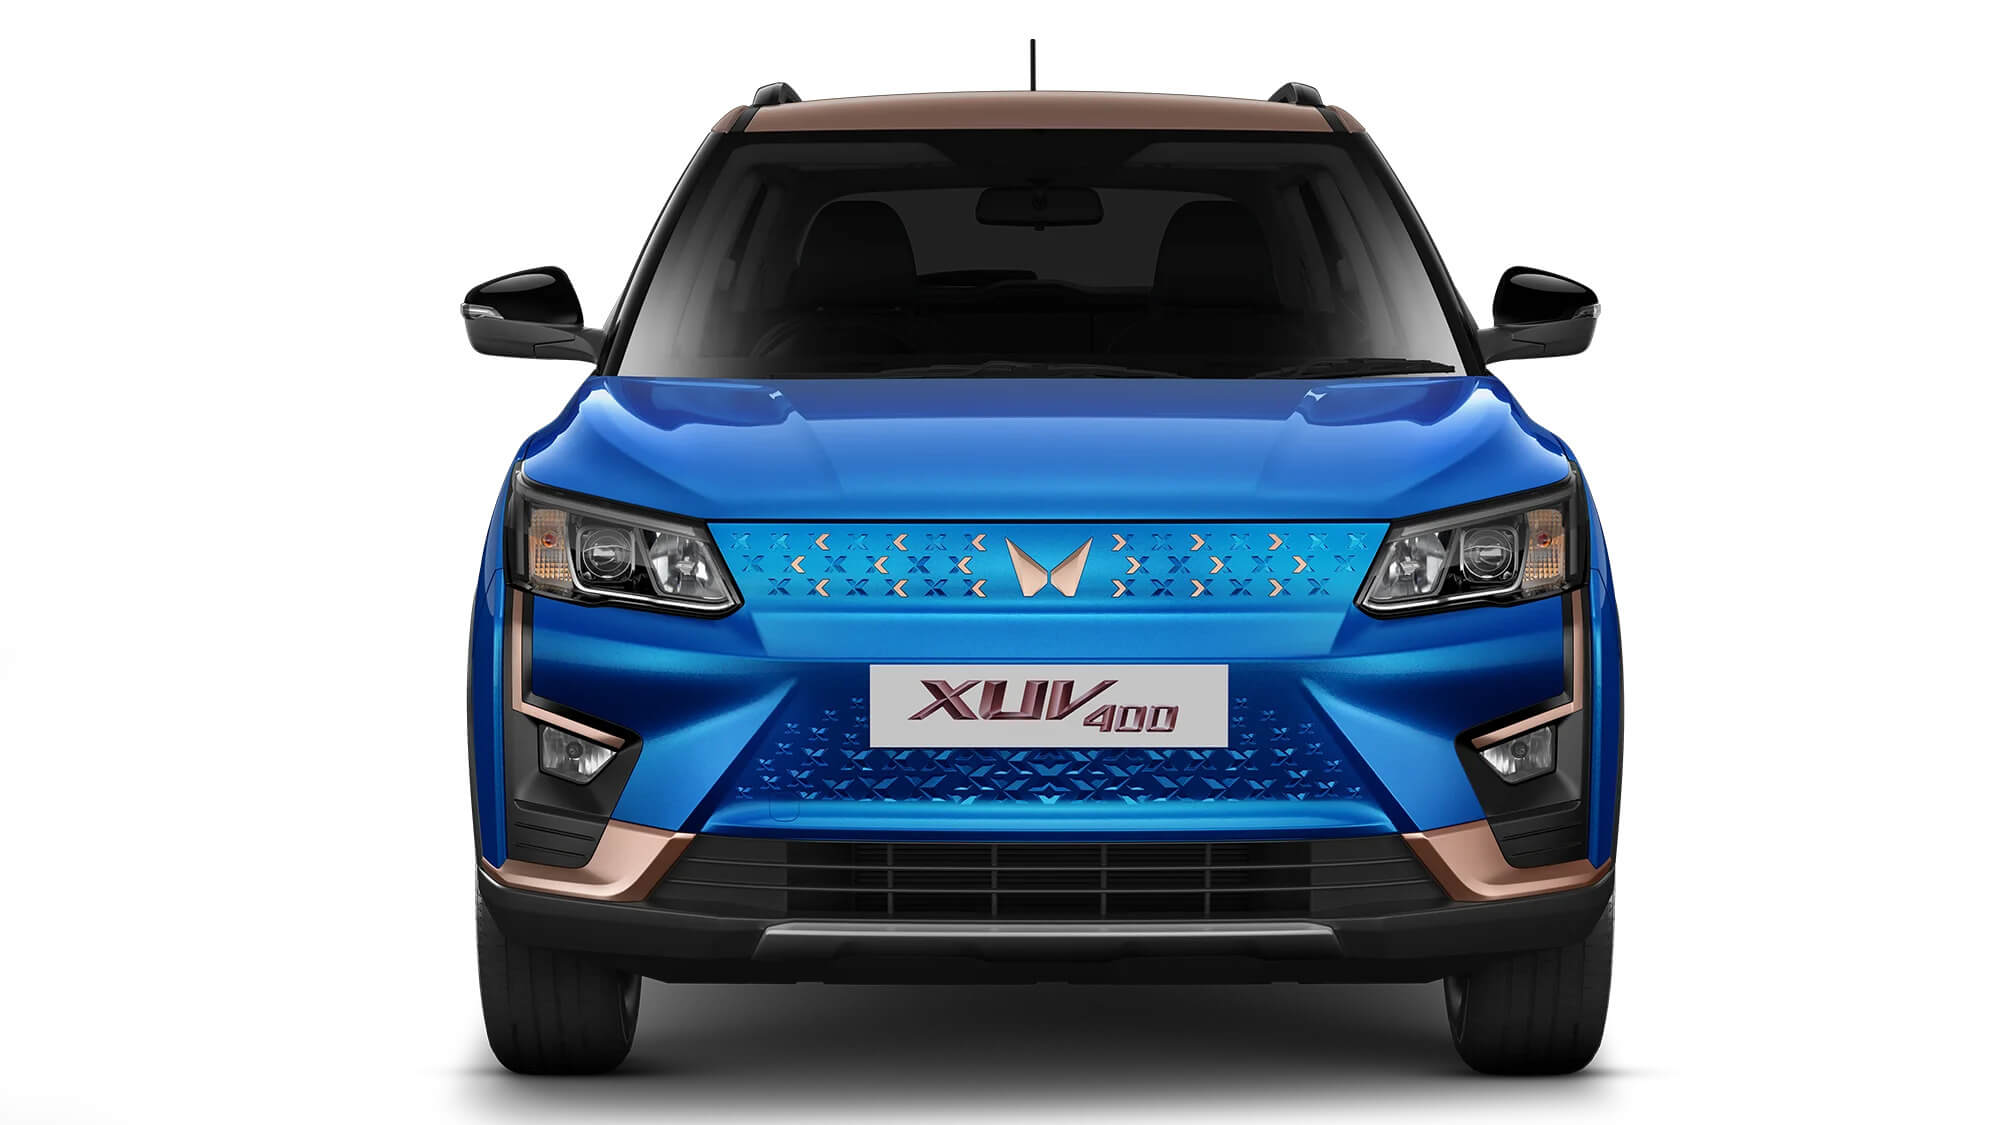 Front Styling in Mahindra XUV400